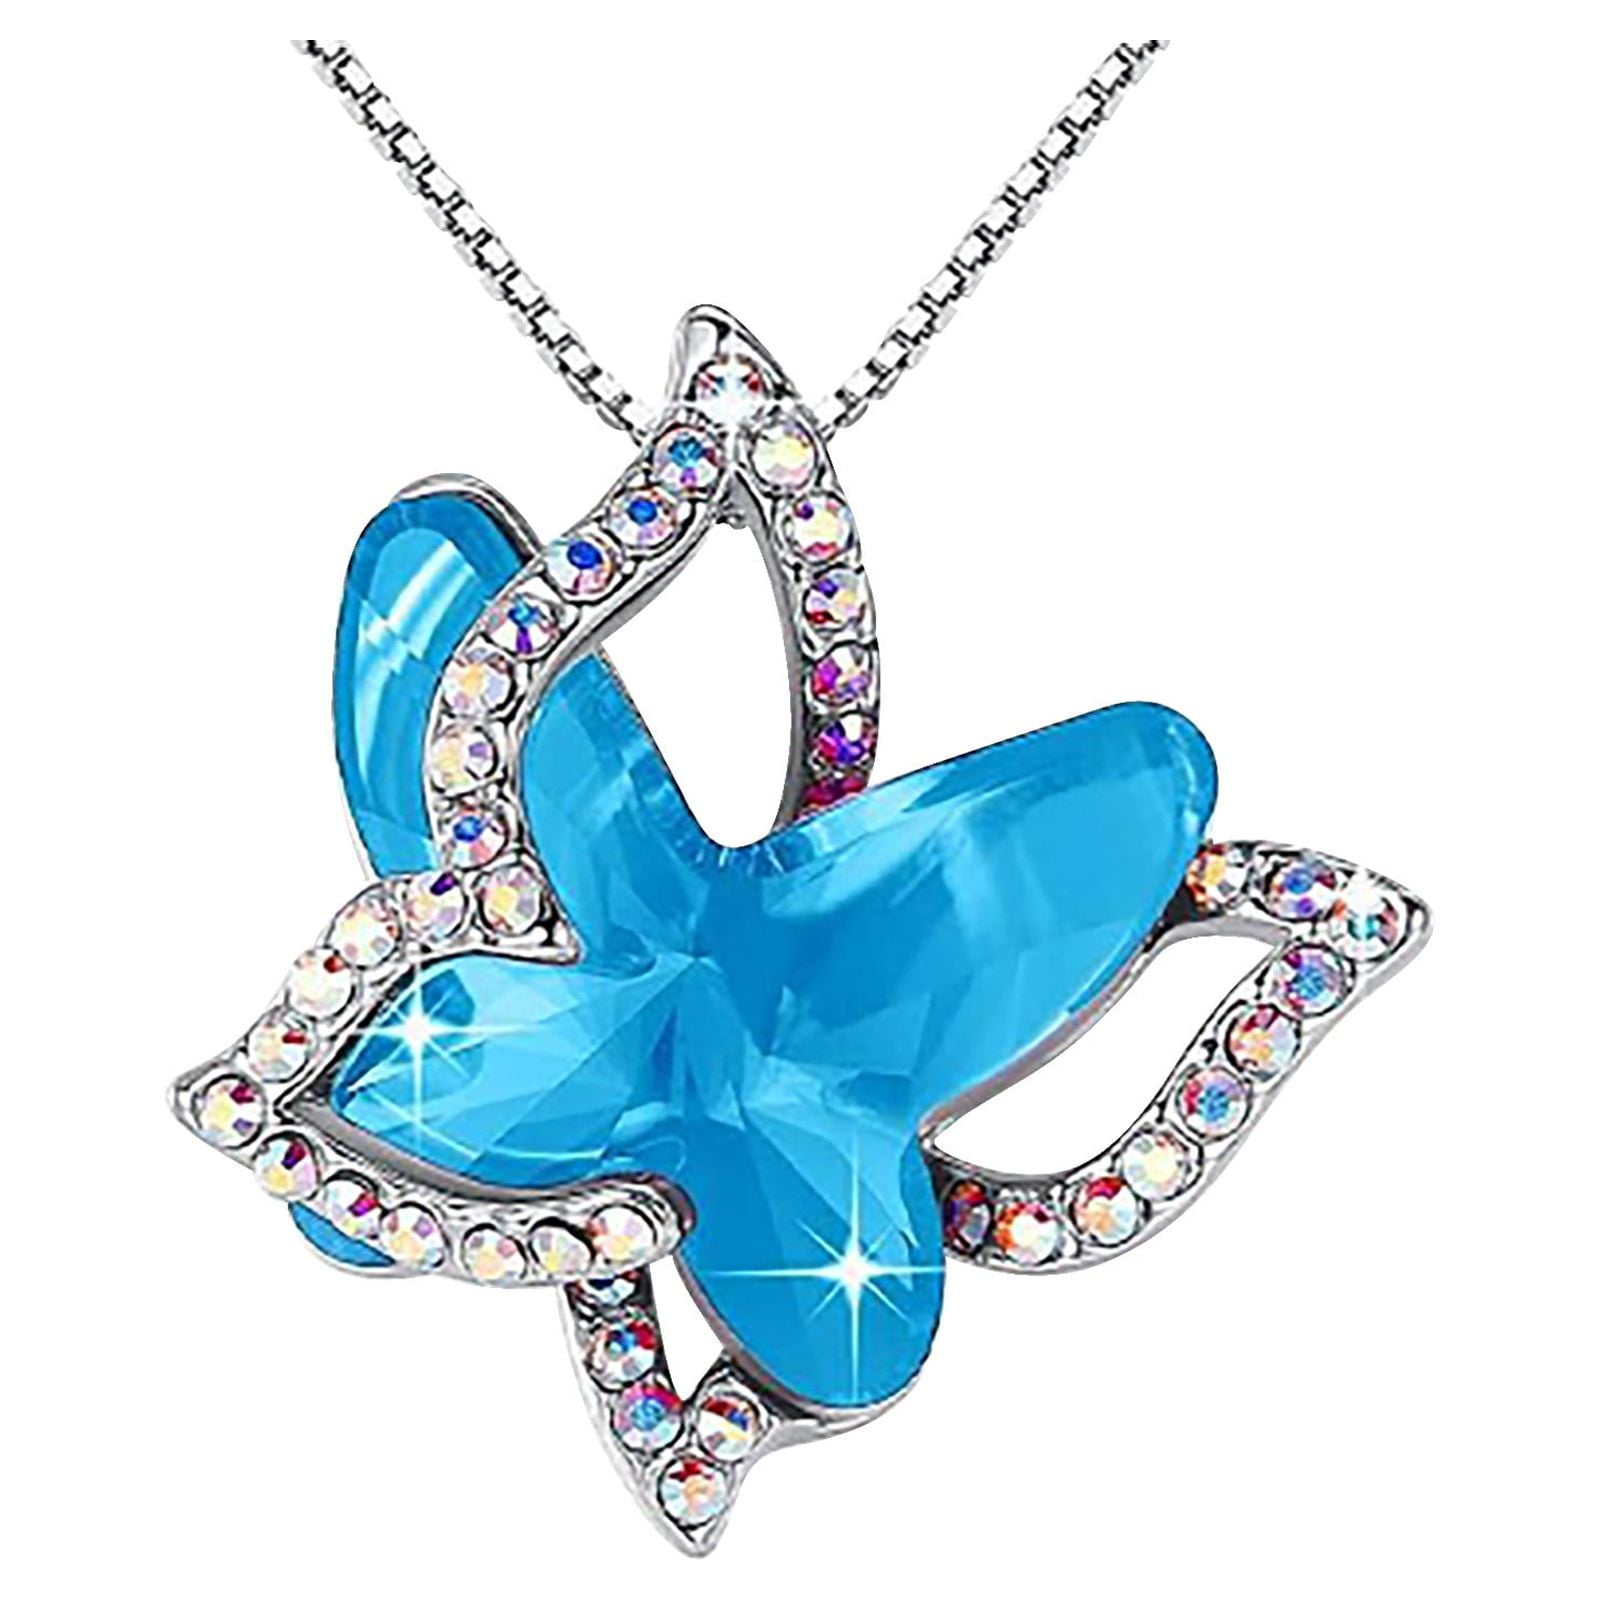 Blue skies and endless possibilities with this handcrafted butterfly  necklace.This necklaceis jeweled with crystals. Butterflies are deep and  powerful representations of life. Some people view the butterfly as  representing endurance, change, hope,